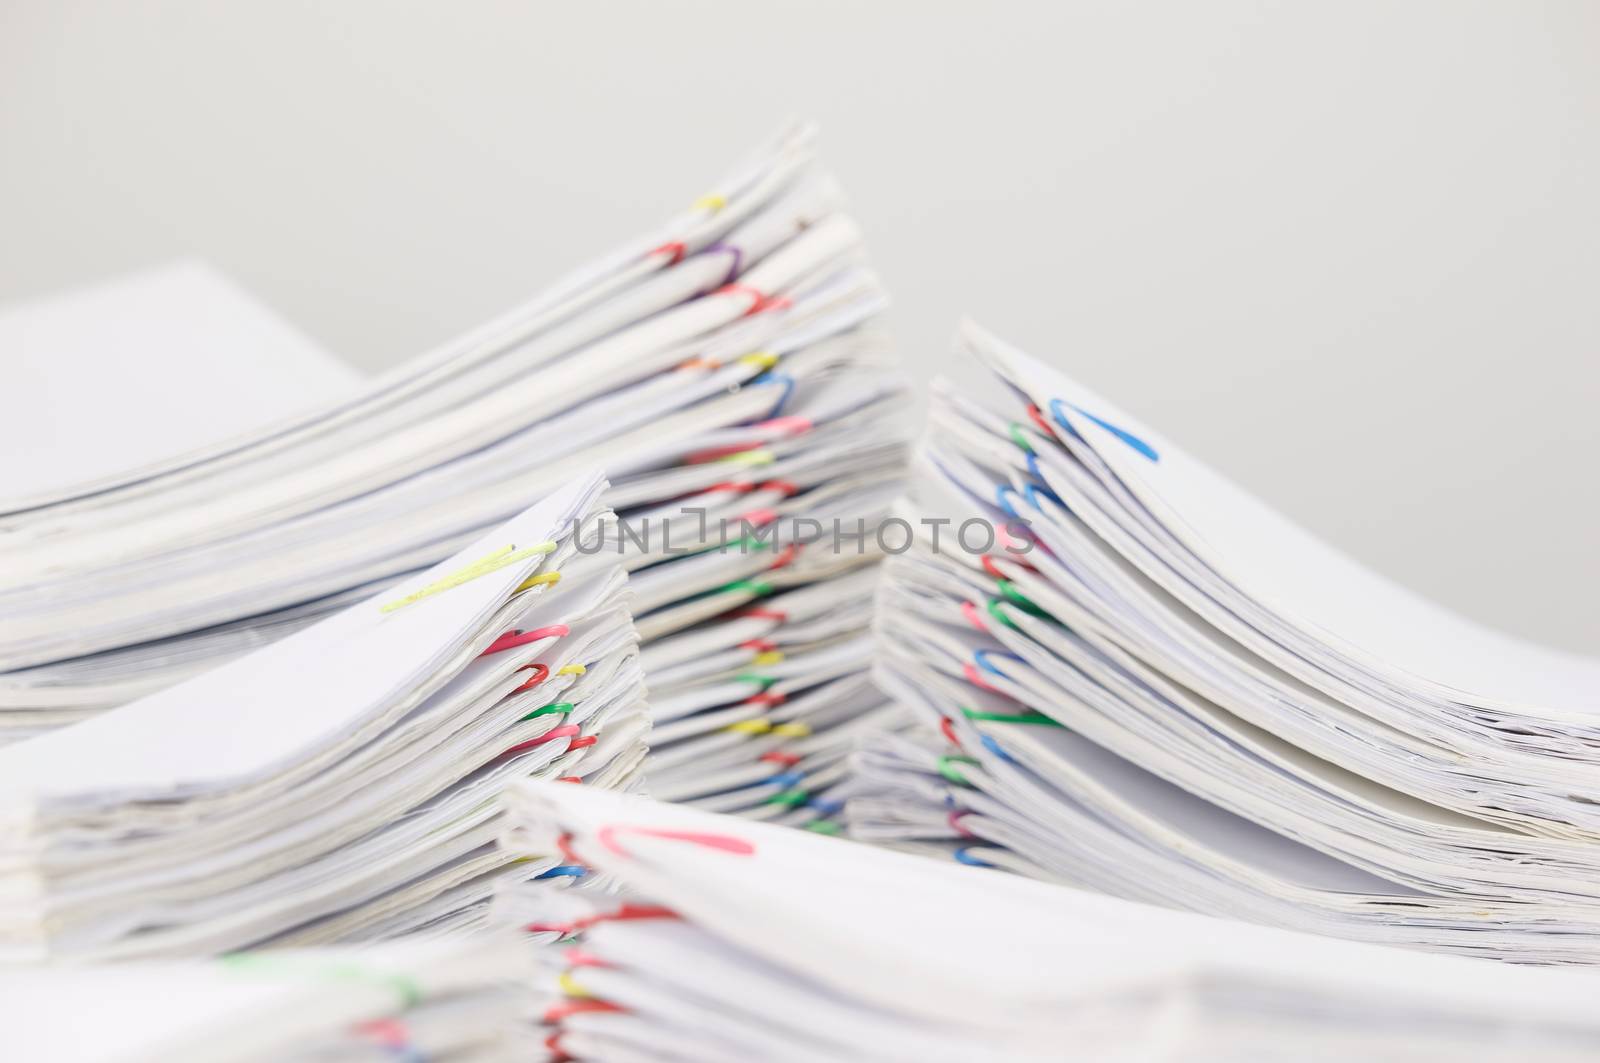 Pile overload document have blur pile paperwork foreground and background by eaglesky